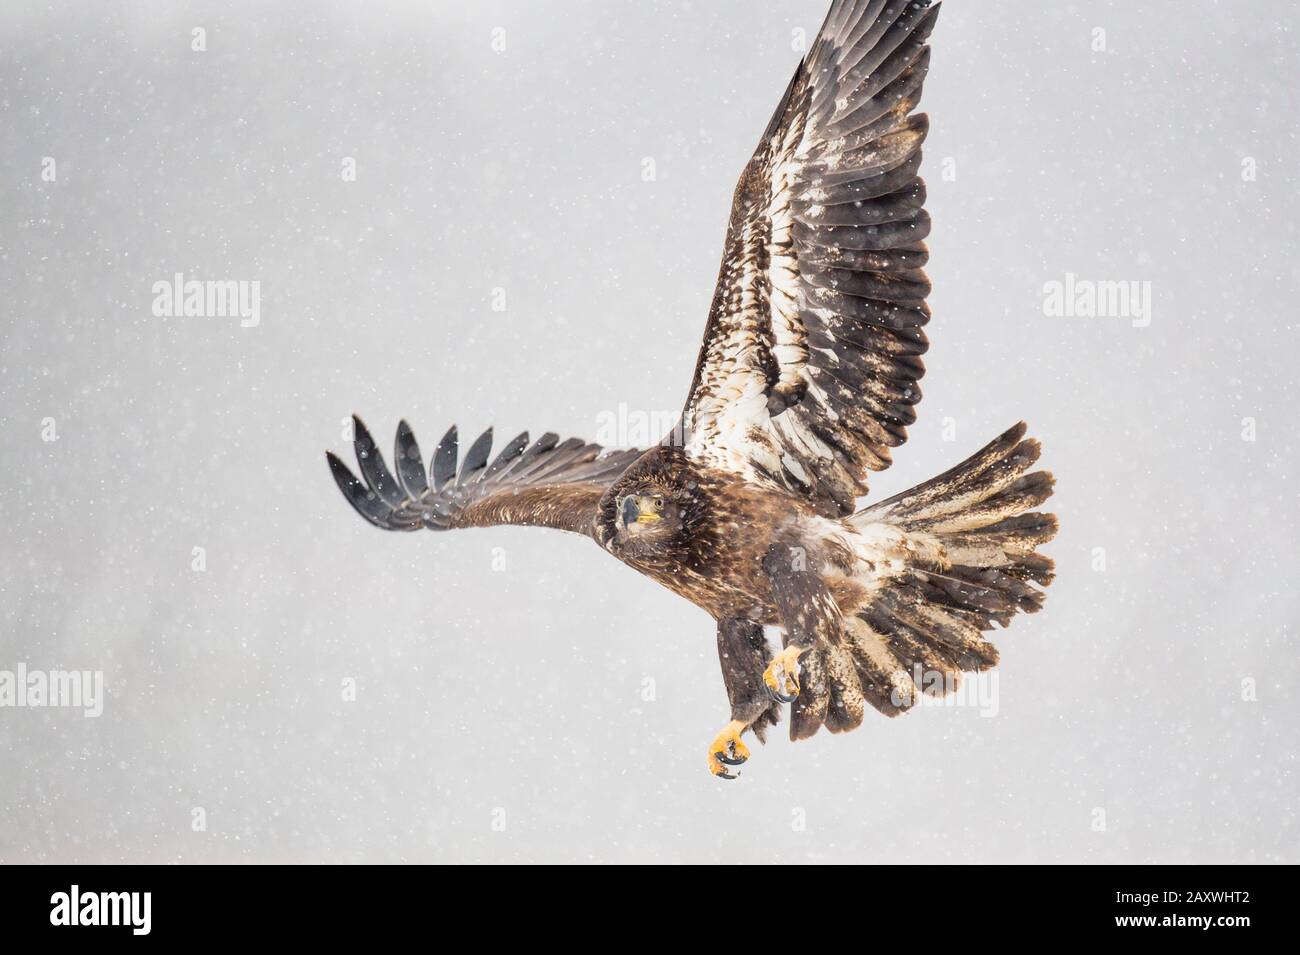 A juvenile Bald Eagle flies over an open field in the falling snow on a cold winter day. Stock Photo